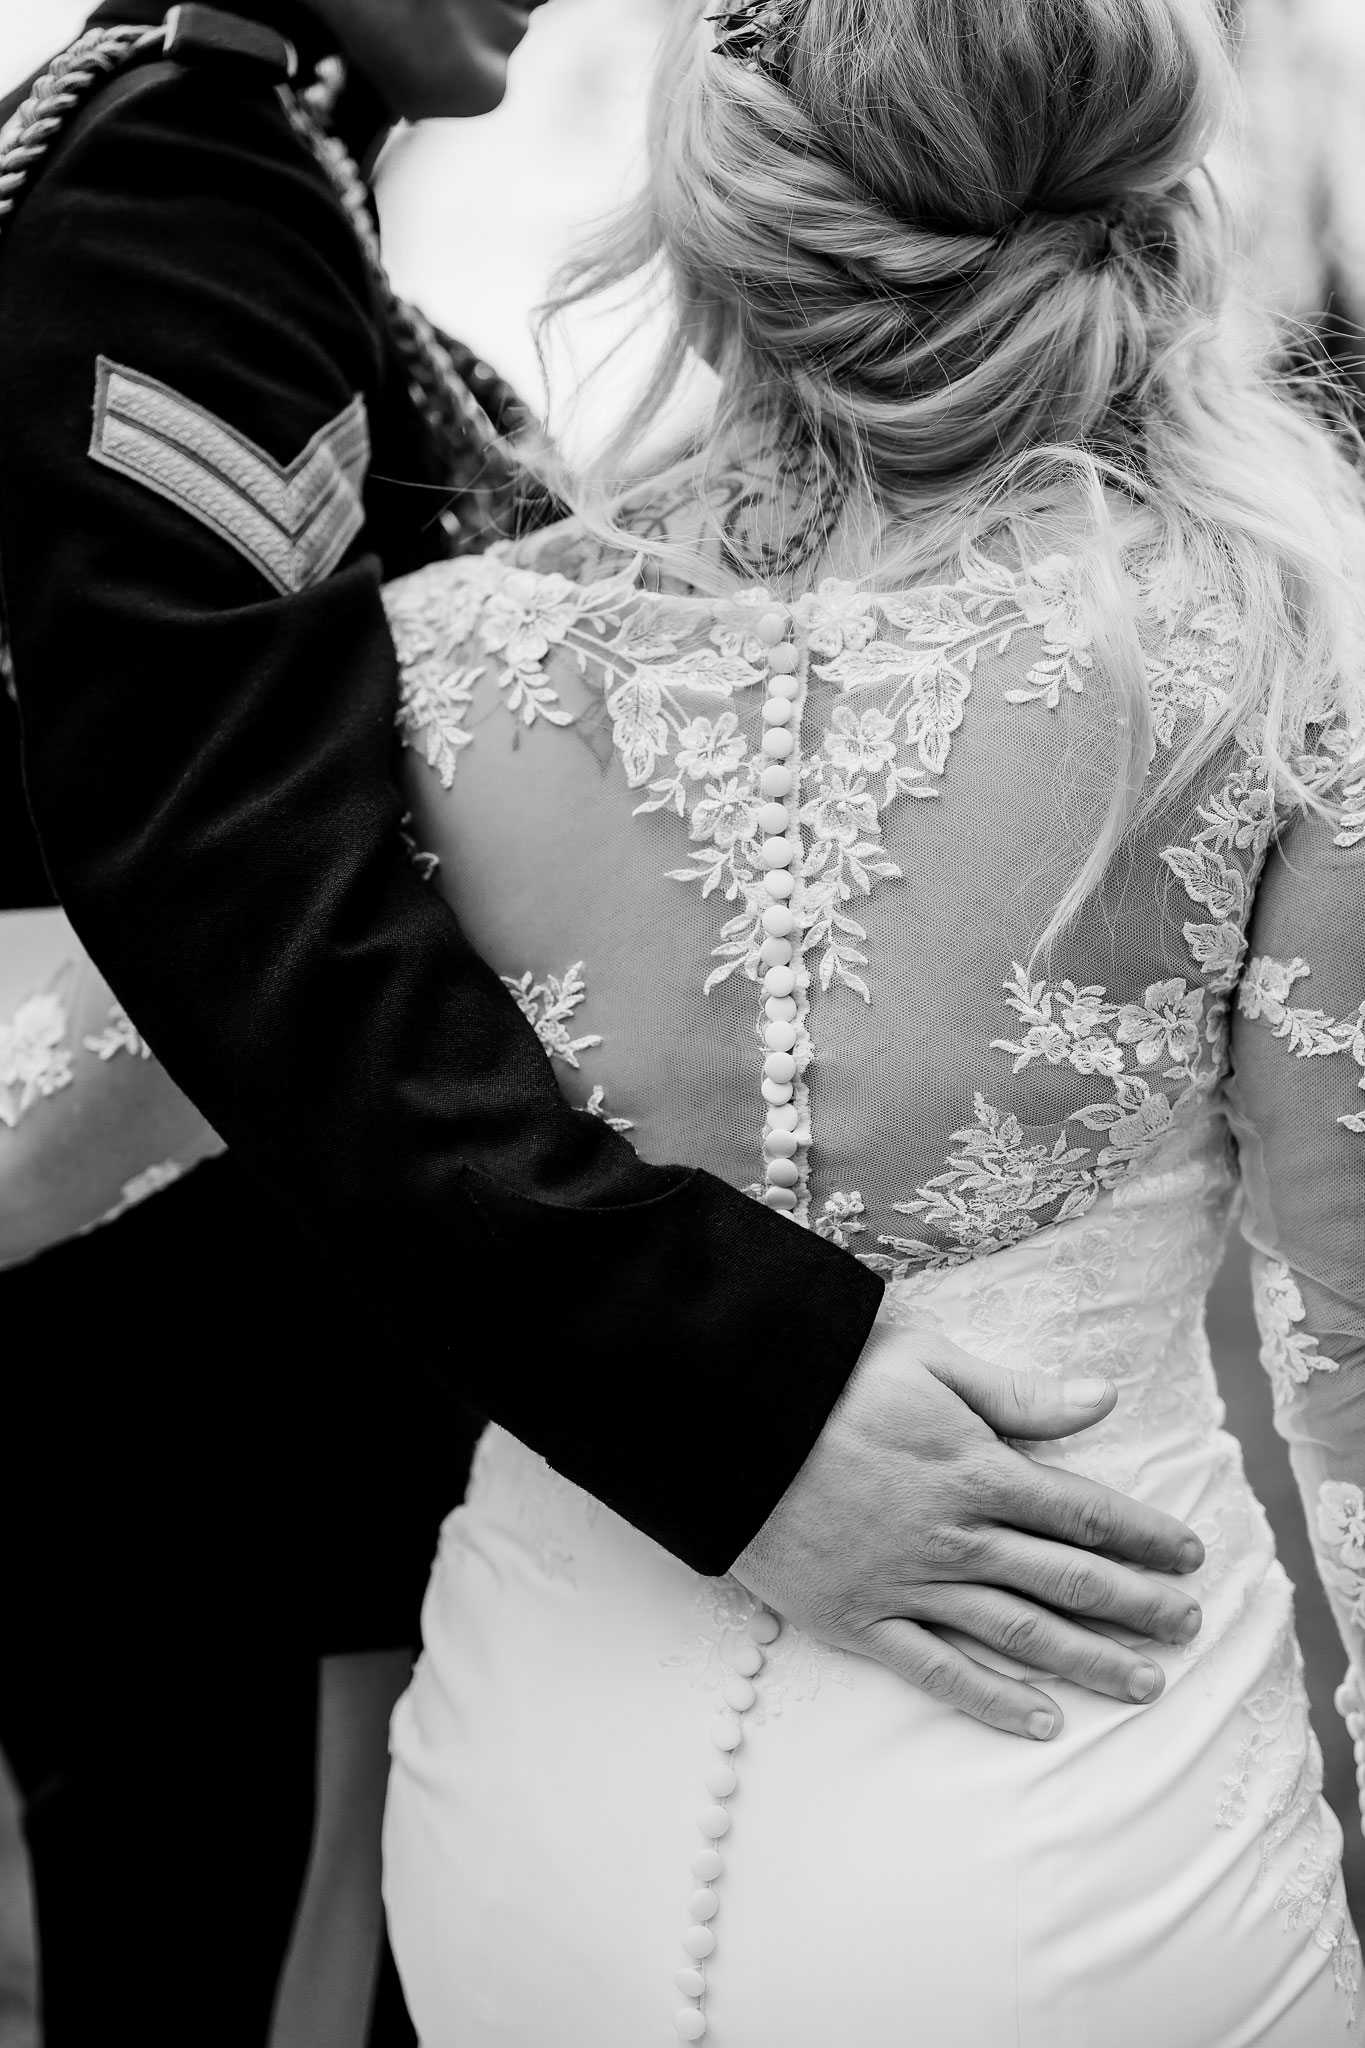 a monochrome image of the bride and groom